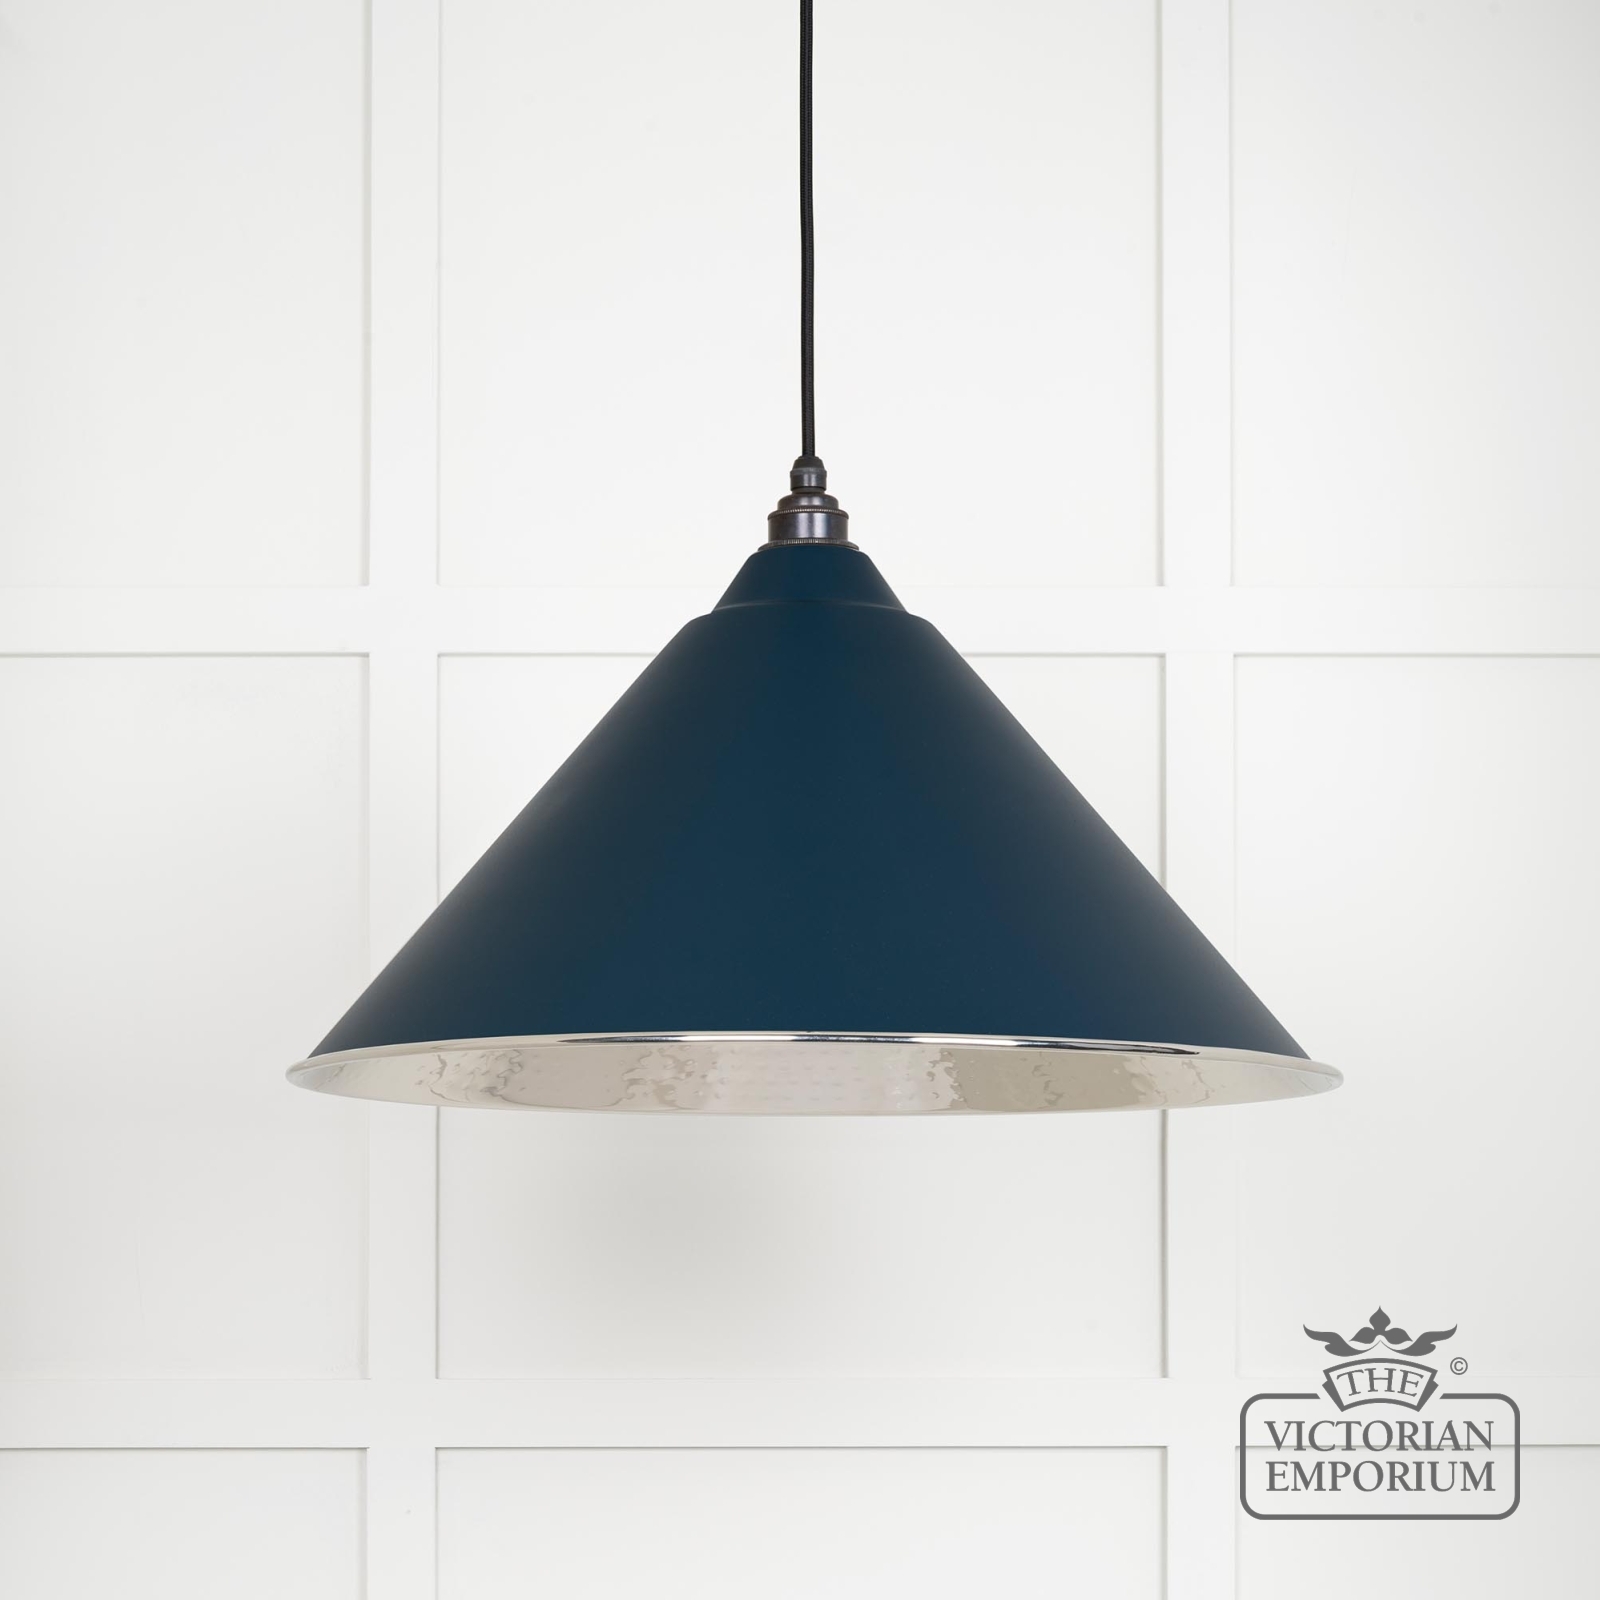 Hockliffe pendant in hammered nickel and deep blue exterior